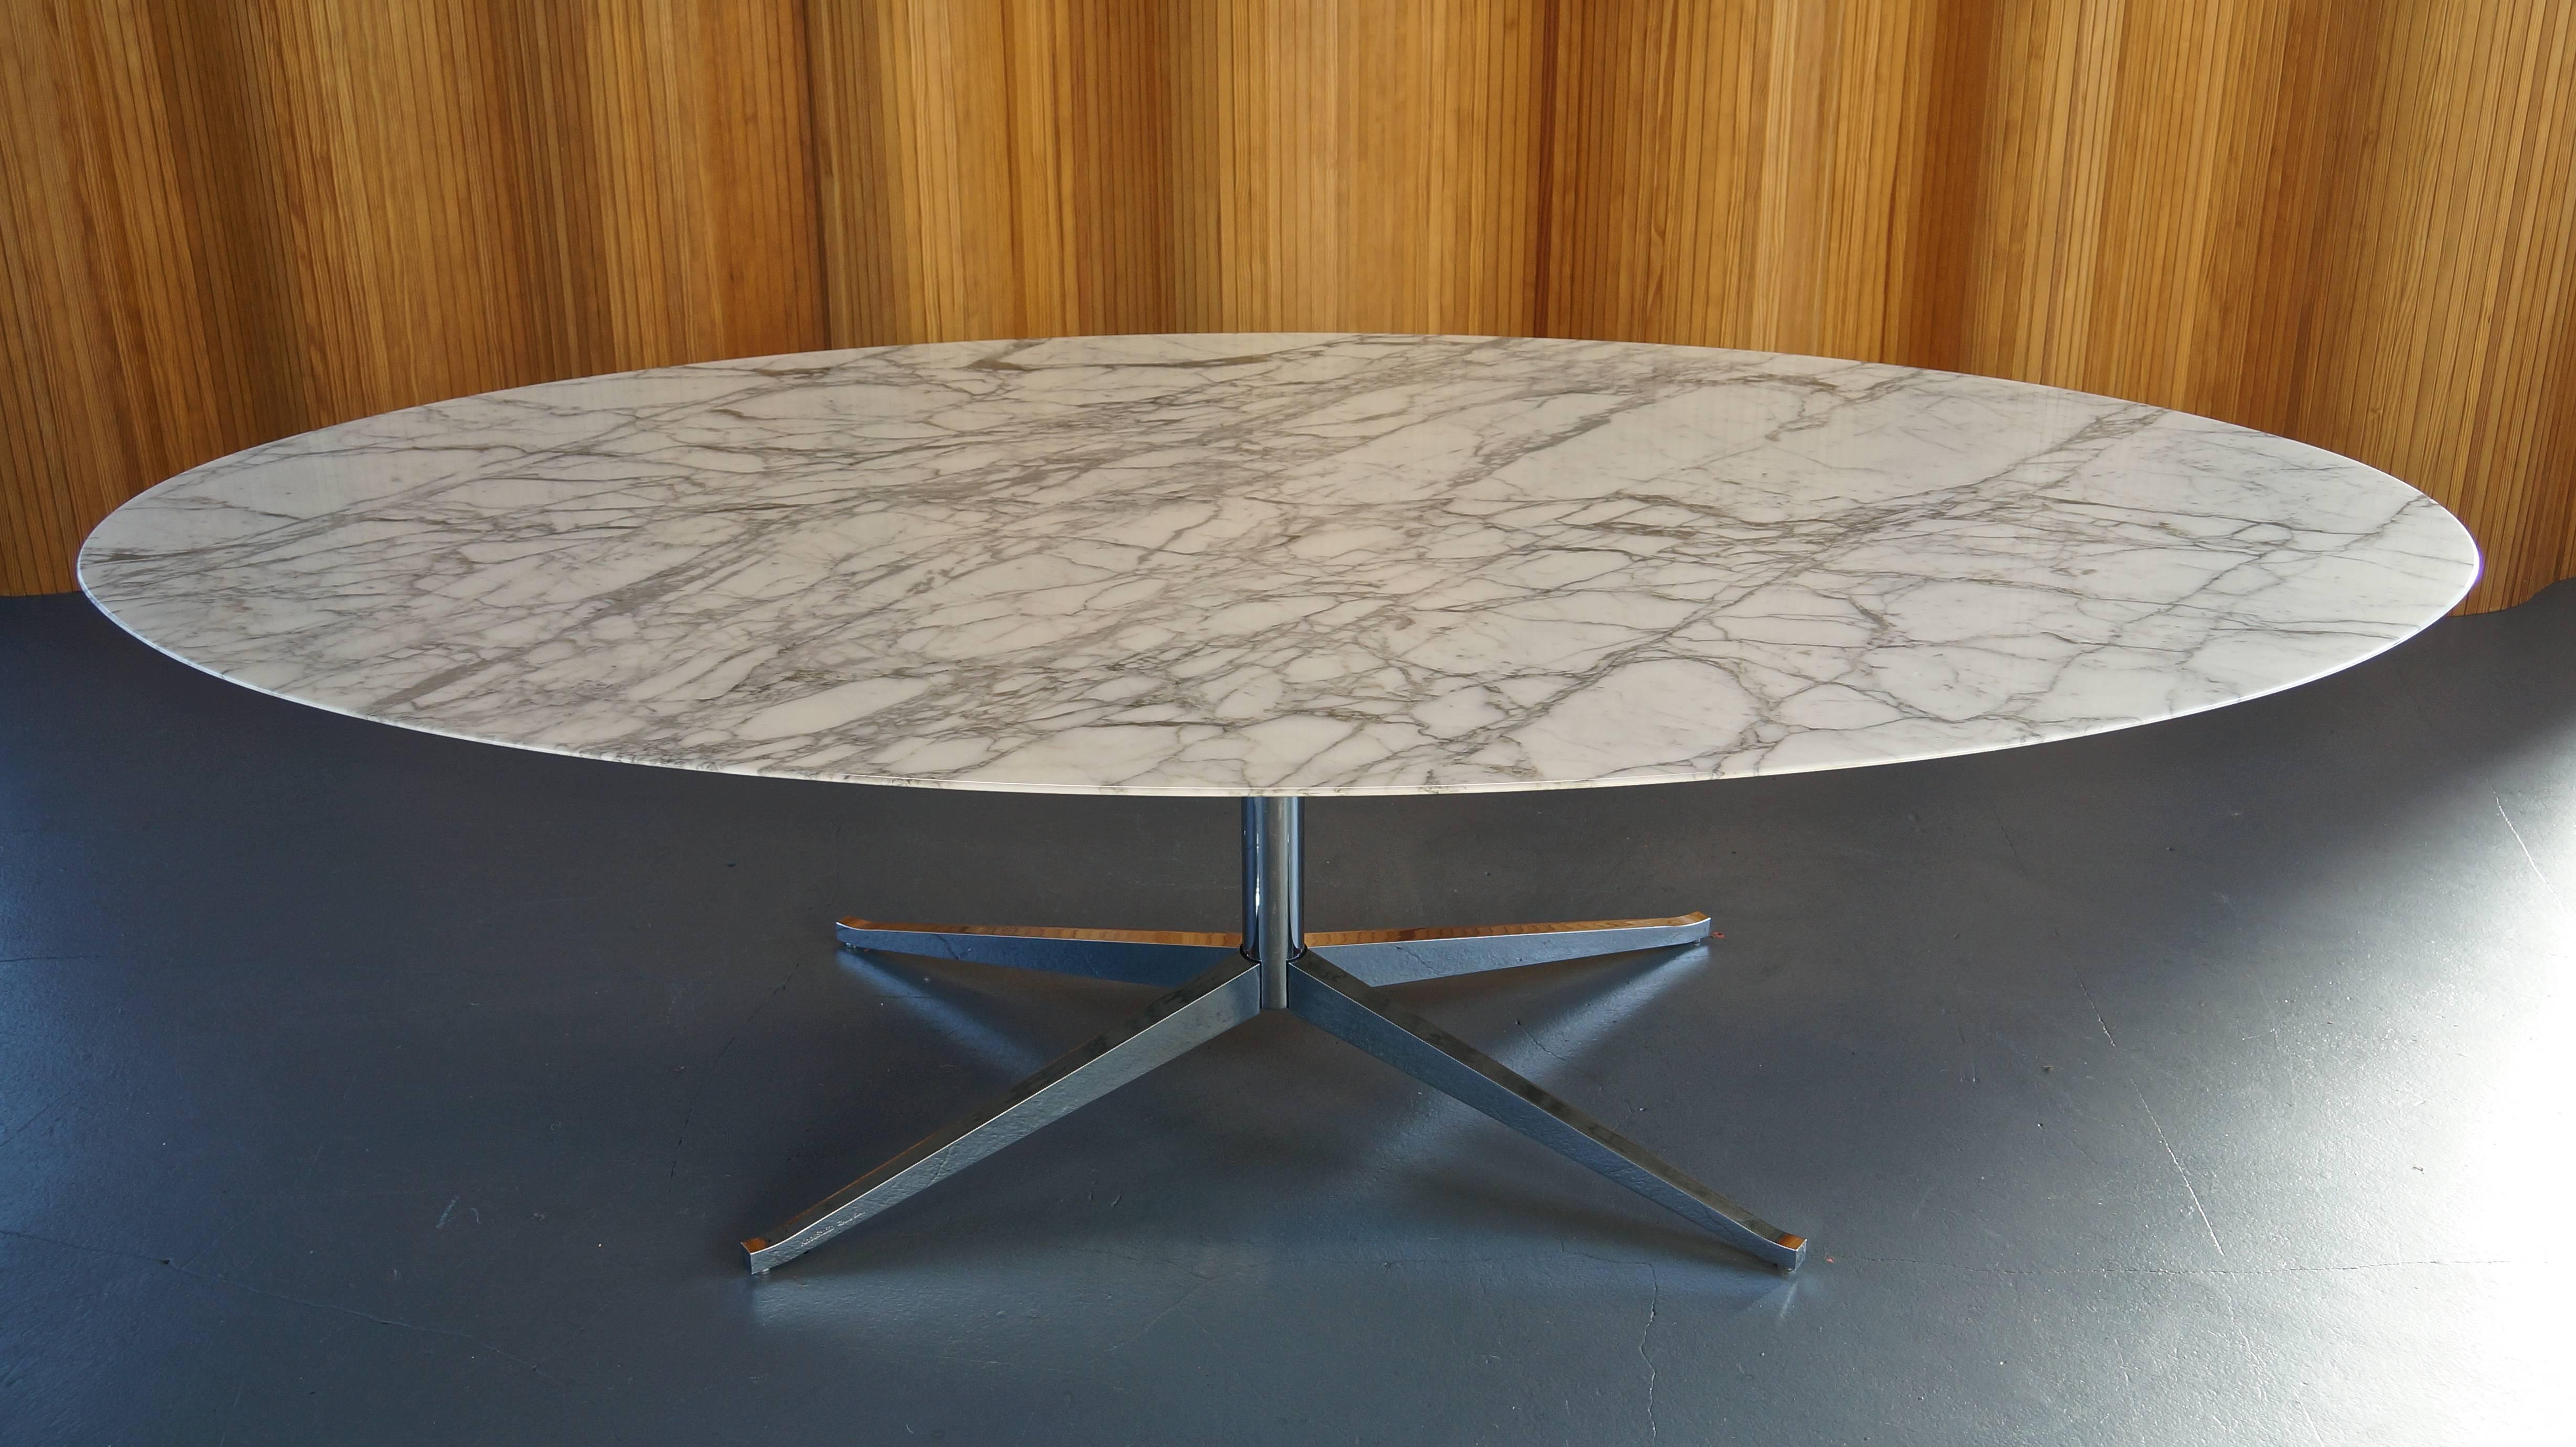 White Calacatta marble dining table, meeting table or desk by Florence Knoll
Manufacturer: Knoll

Largest size available at 244cm long x 137cm wide

Makers mark present.

Amazing marble grains on this example!